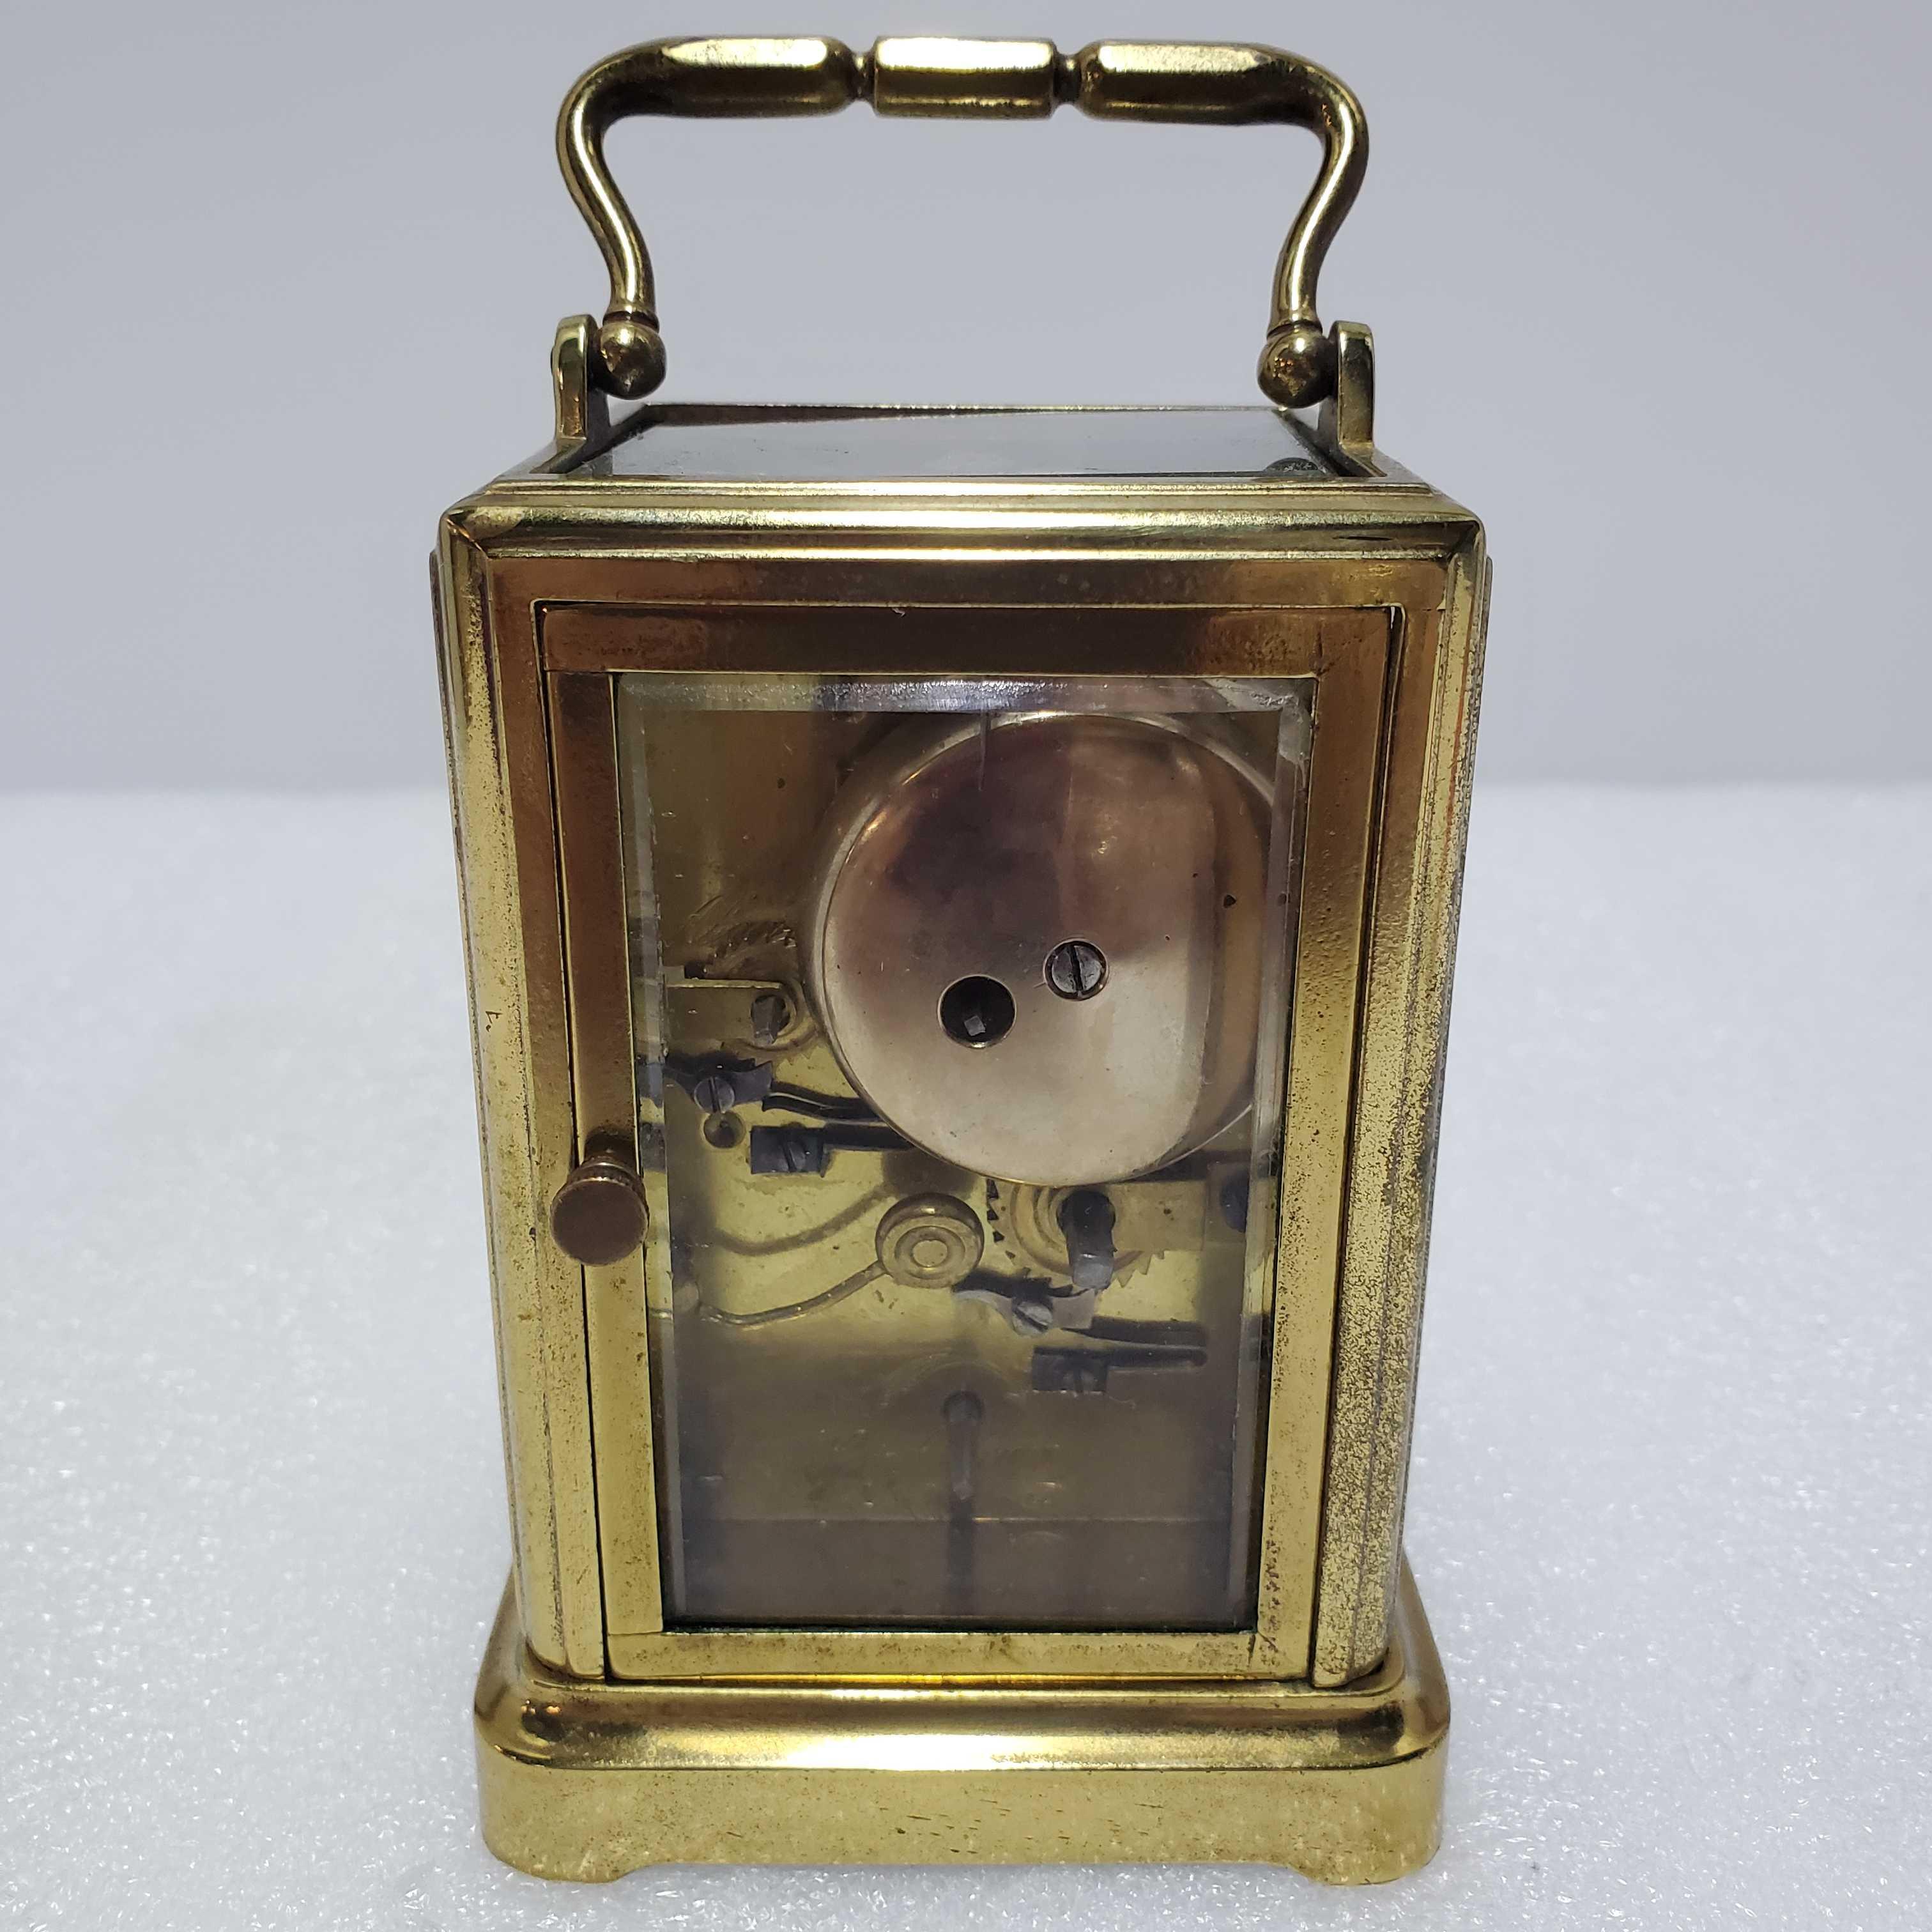 An Antique French AD Mougin / Henri Acier, Carriage Alarm Clock, Late 19th C. Working With Key